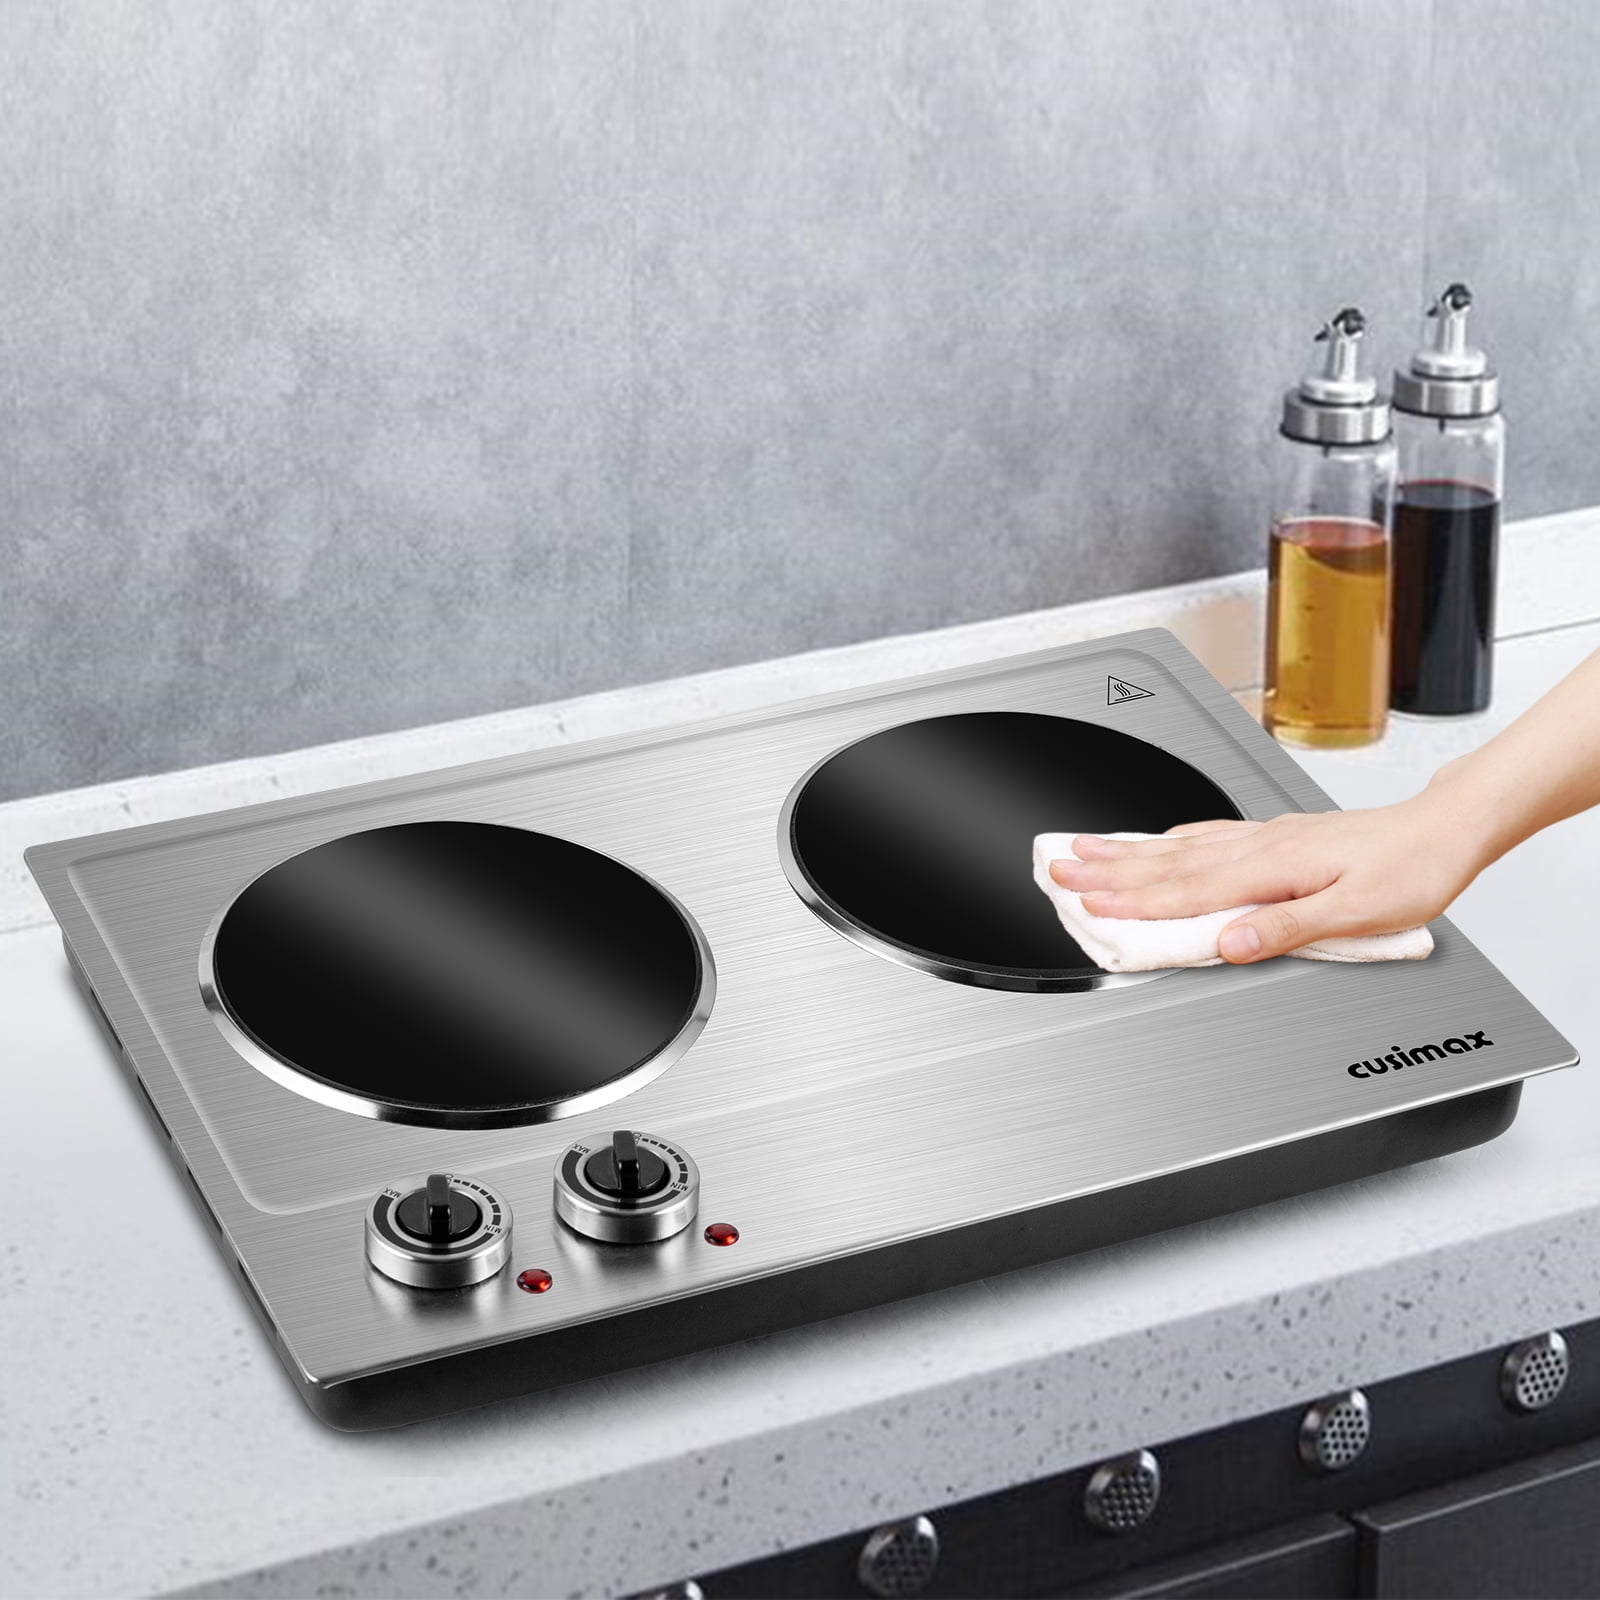 Cusimax Hot Plate, 1800W Ceramic Electric Double Burner for